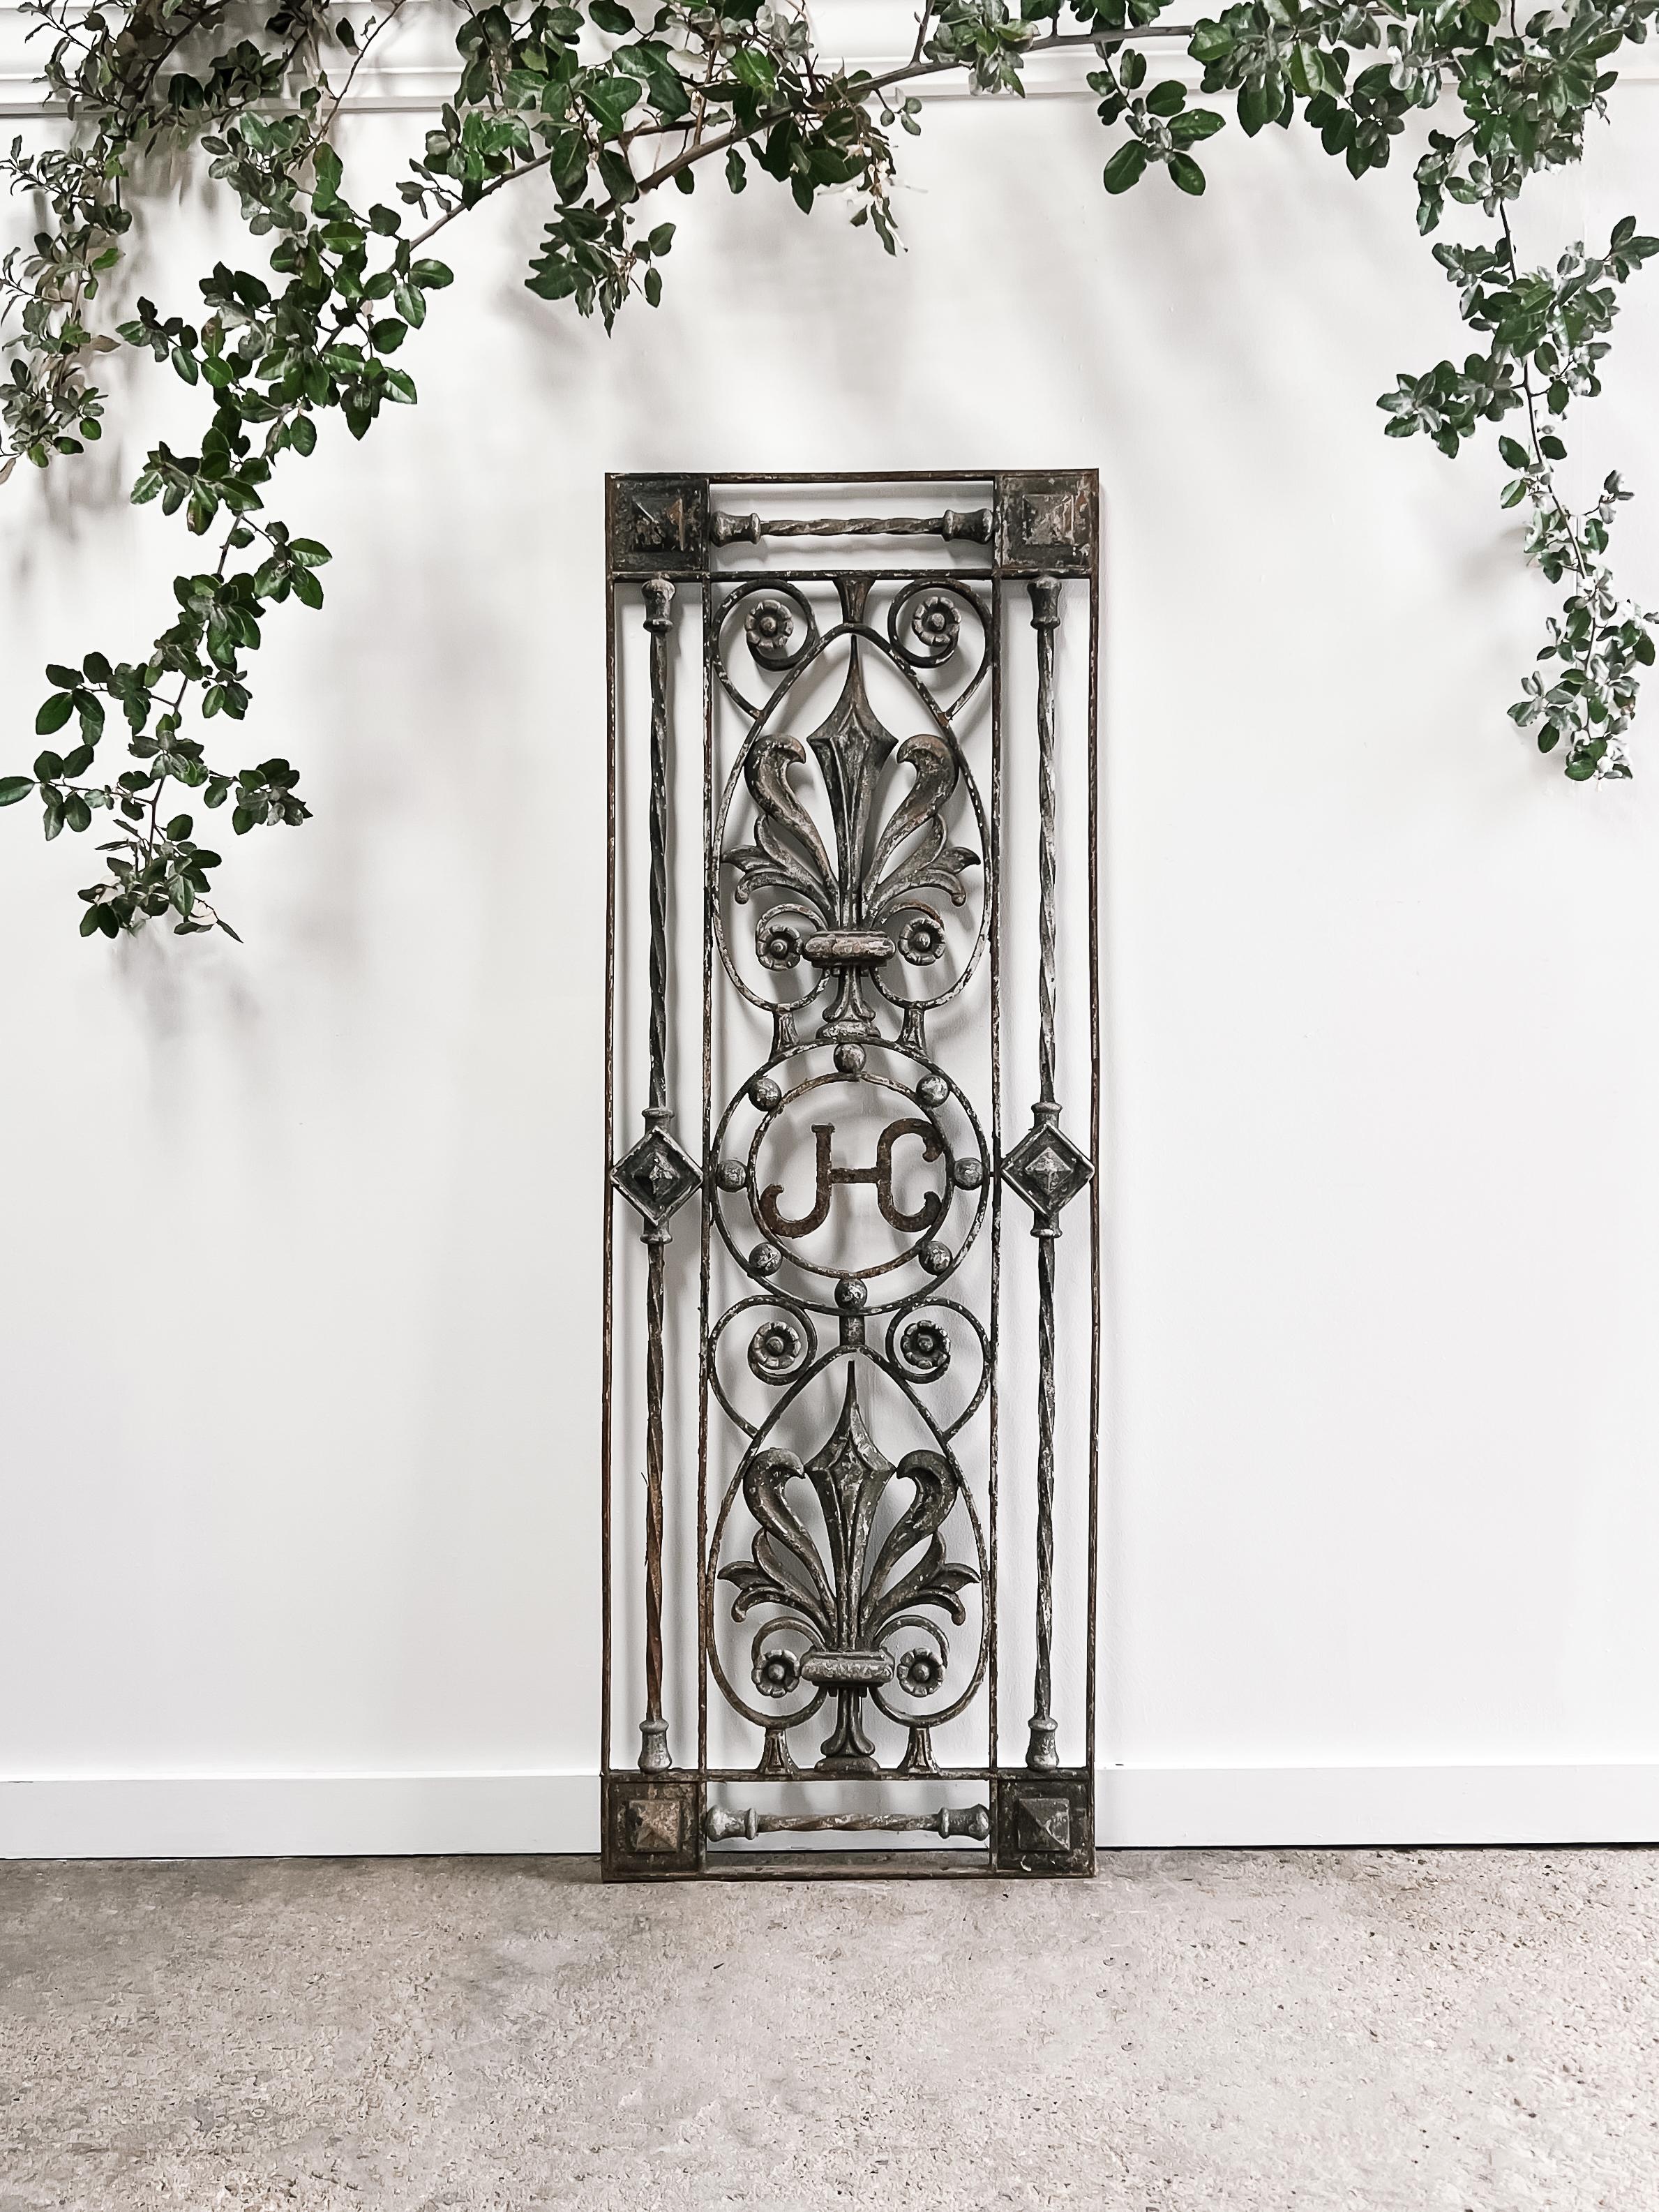 A wonderful substantial and heavy decorative cast iron gate panel found in France. The panel has a great time-worn patina and features a decorative fleur de lis and floral design. Nestled within the center of the panel rests the monogram “JC” or